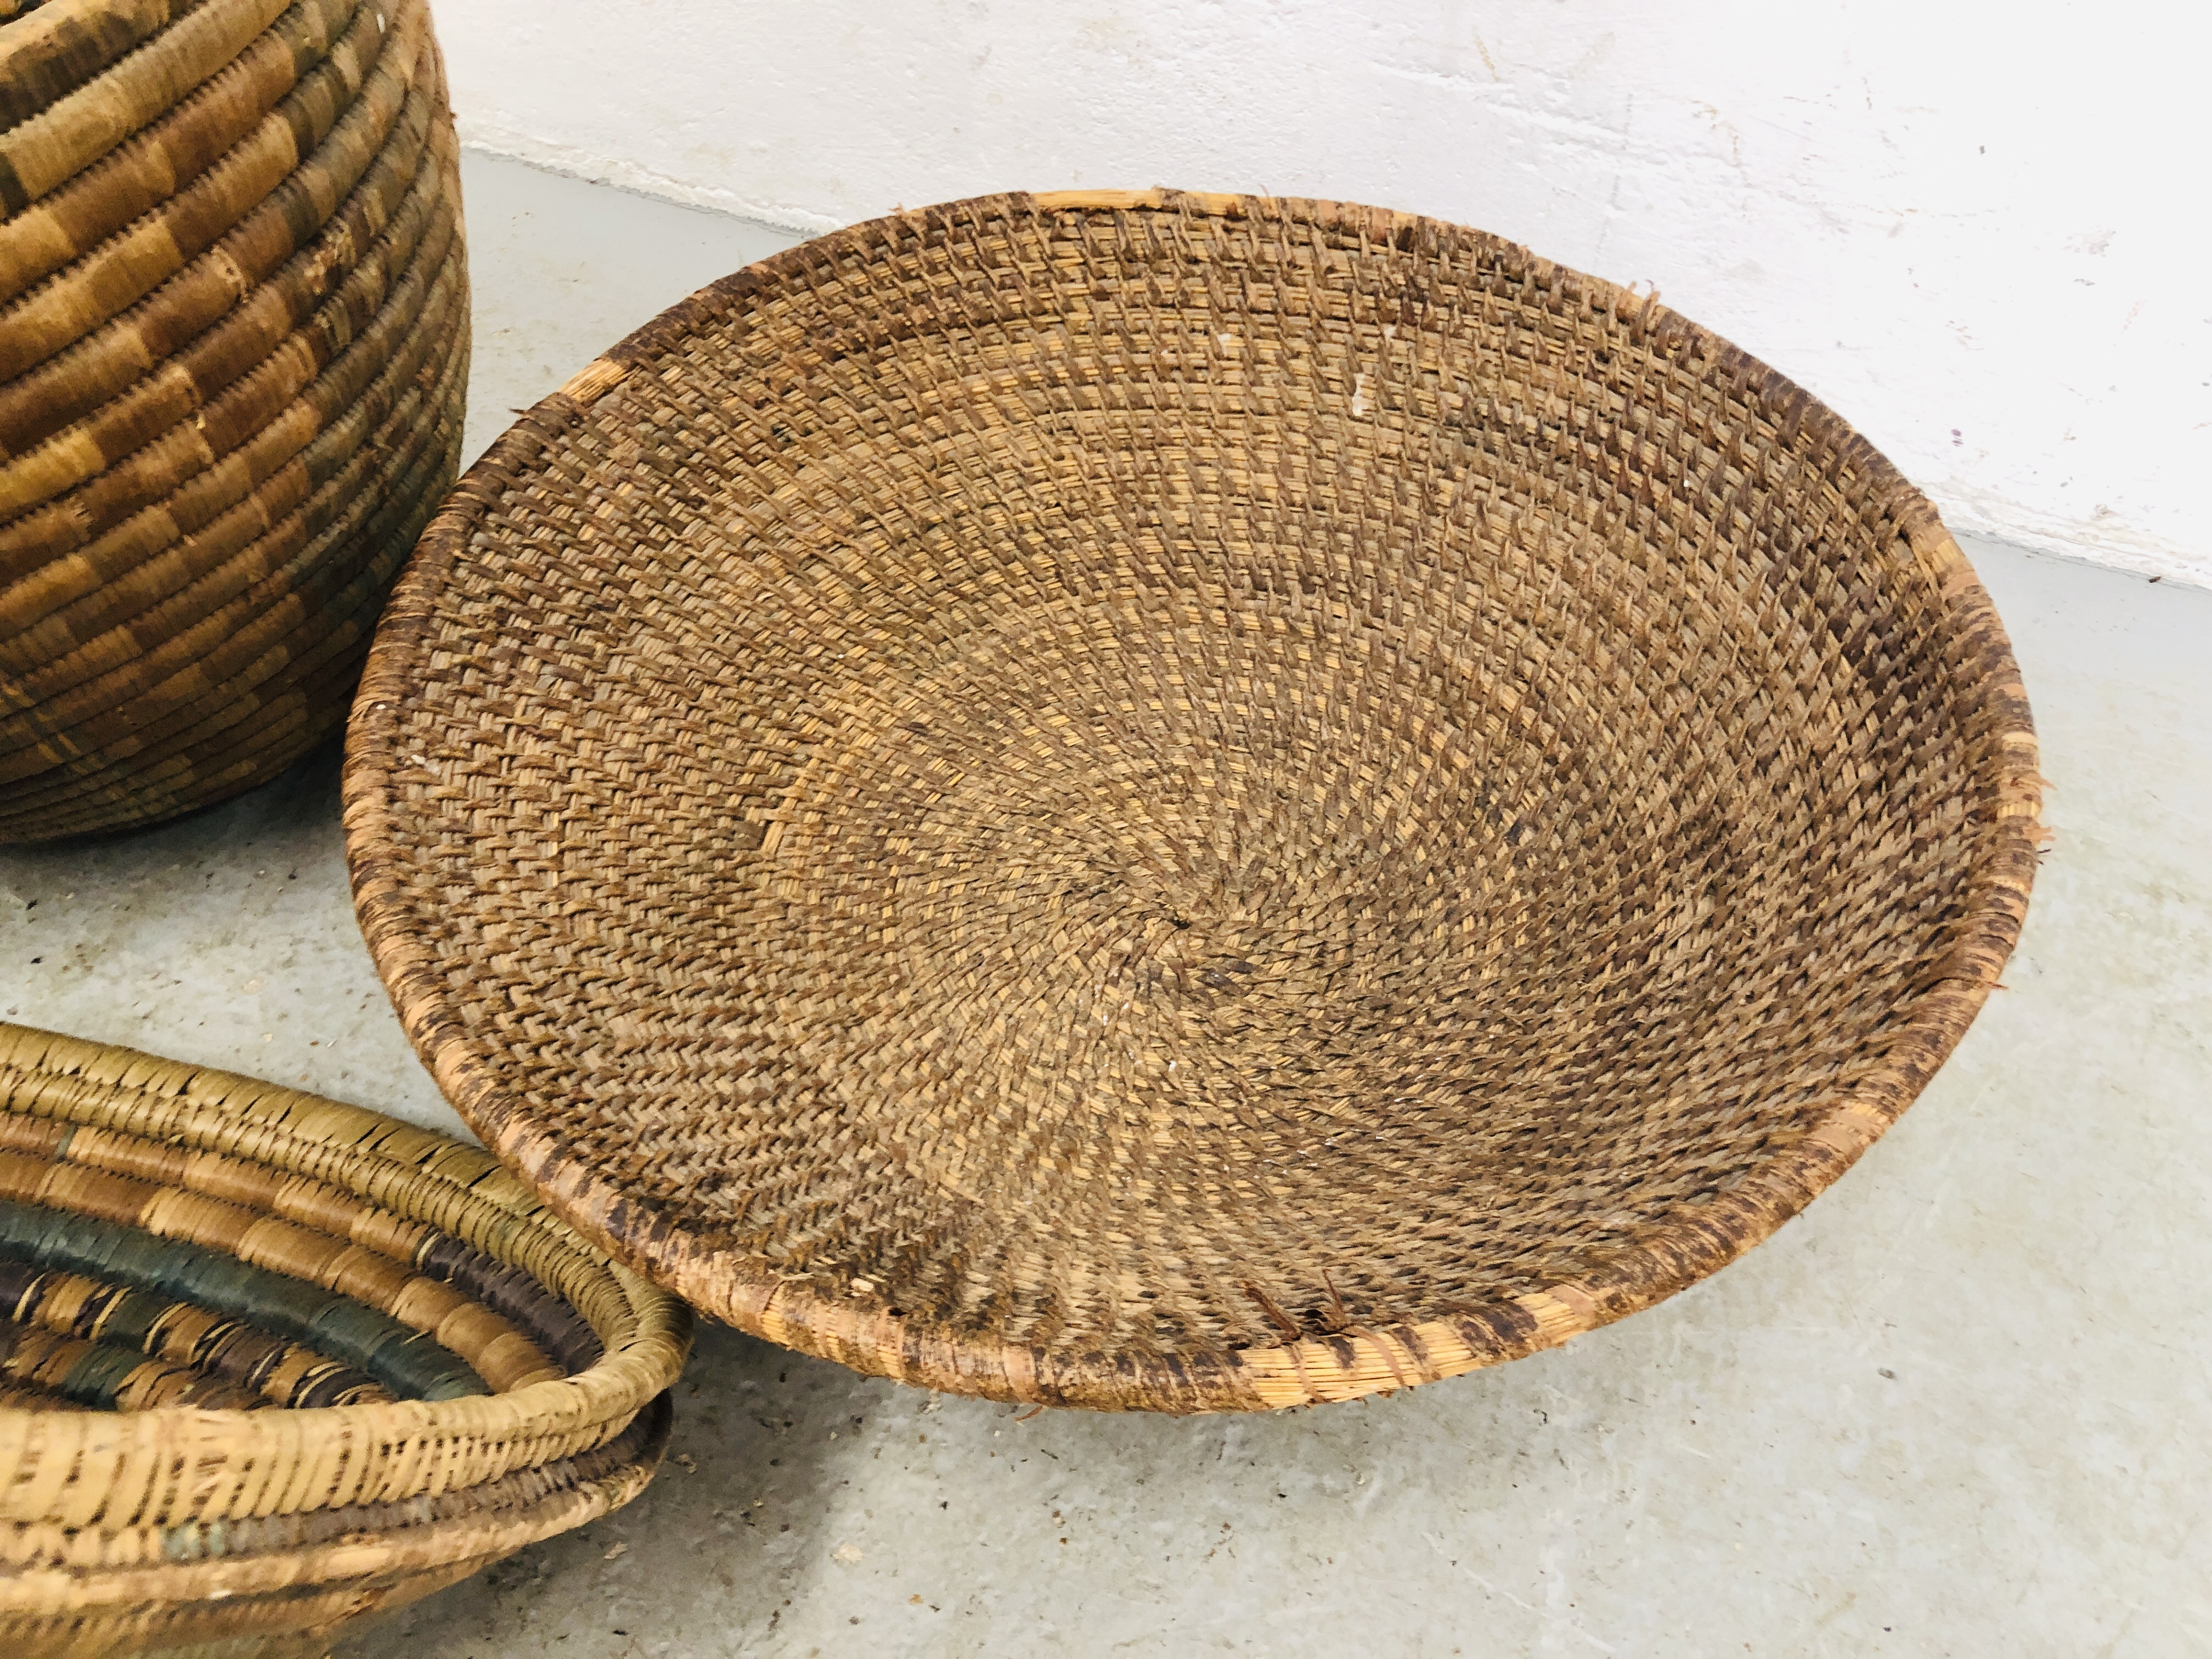 VINTAGE WICKER / SEAGRASS SNAKES BASKET AND ONE OTHER ALONG WITH 4 VINTAGE WALKING CANES, - Image 7 of 8